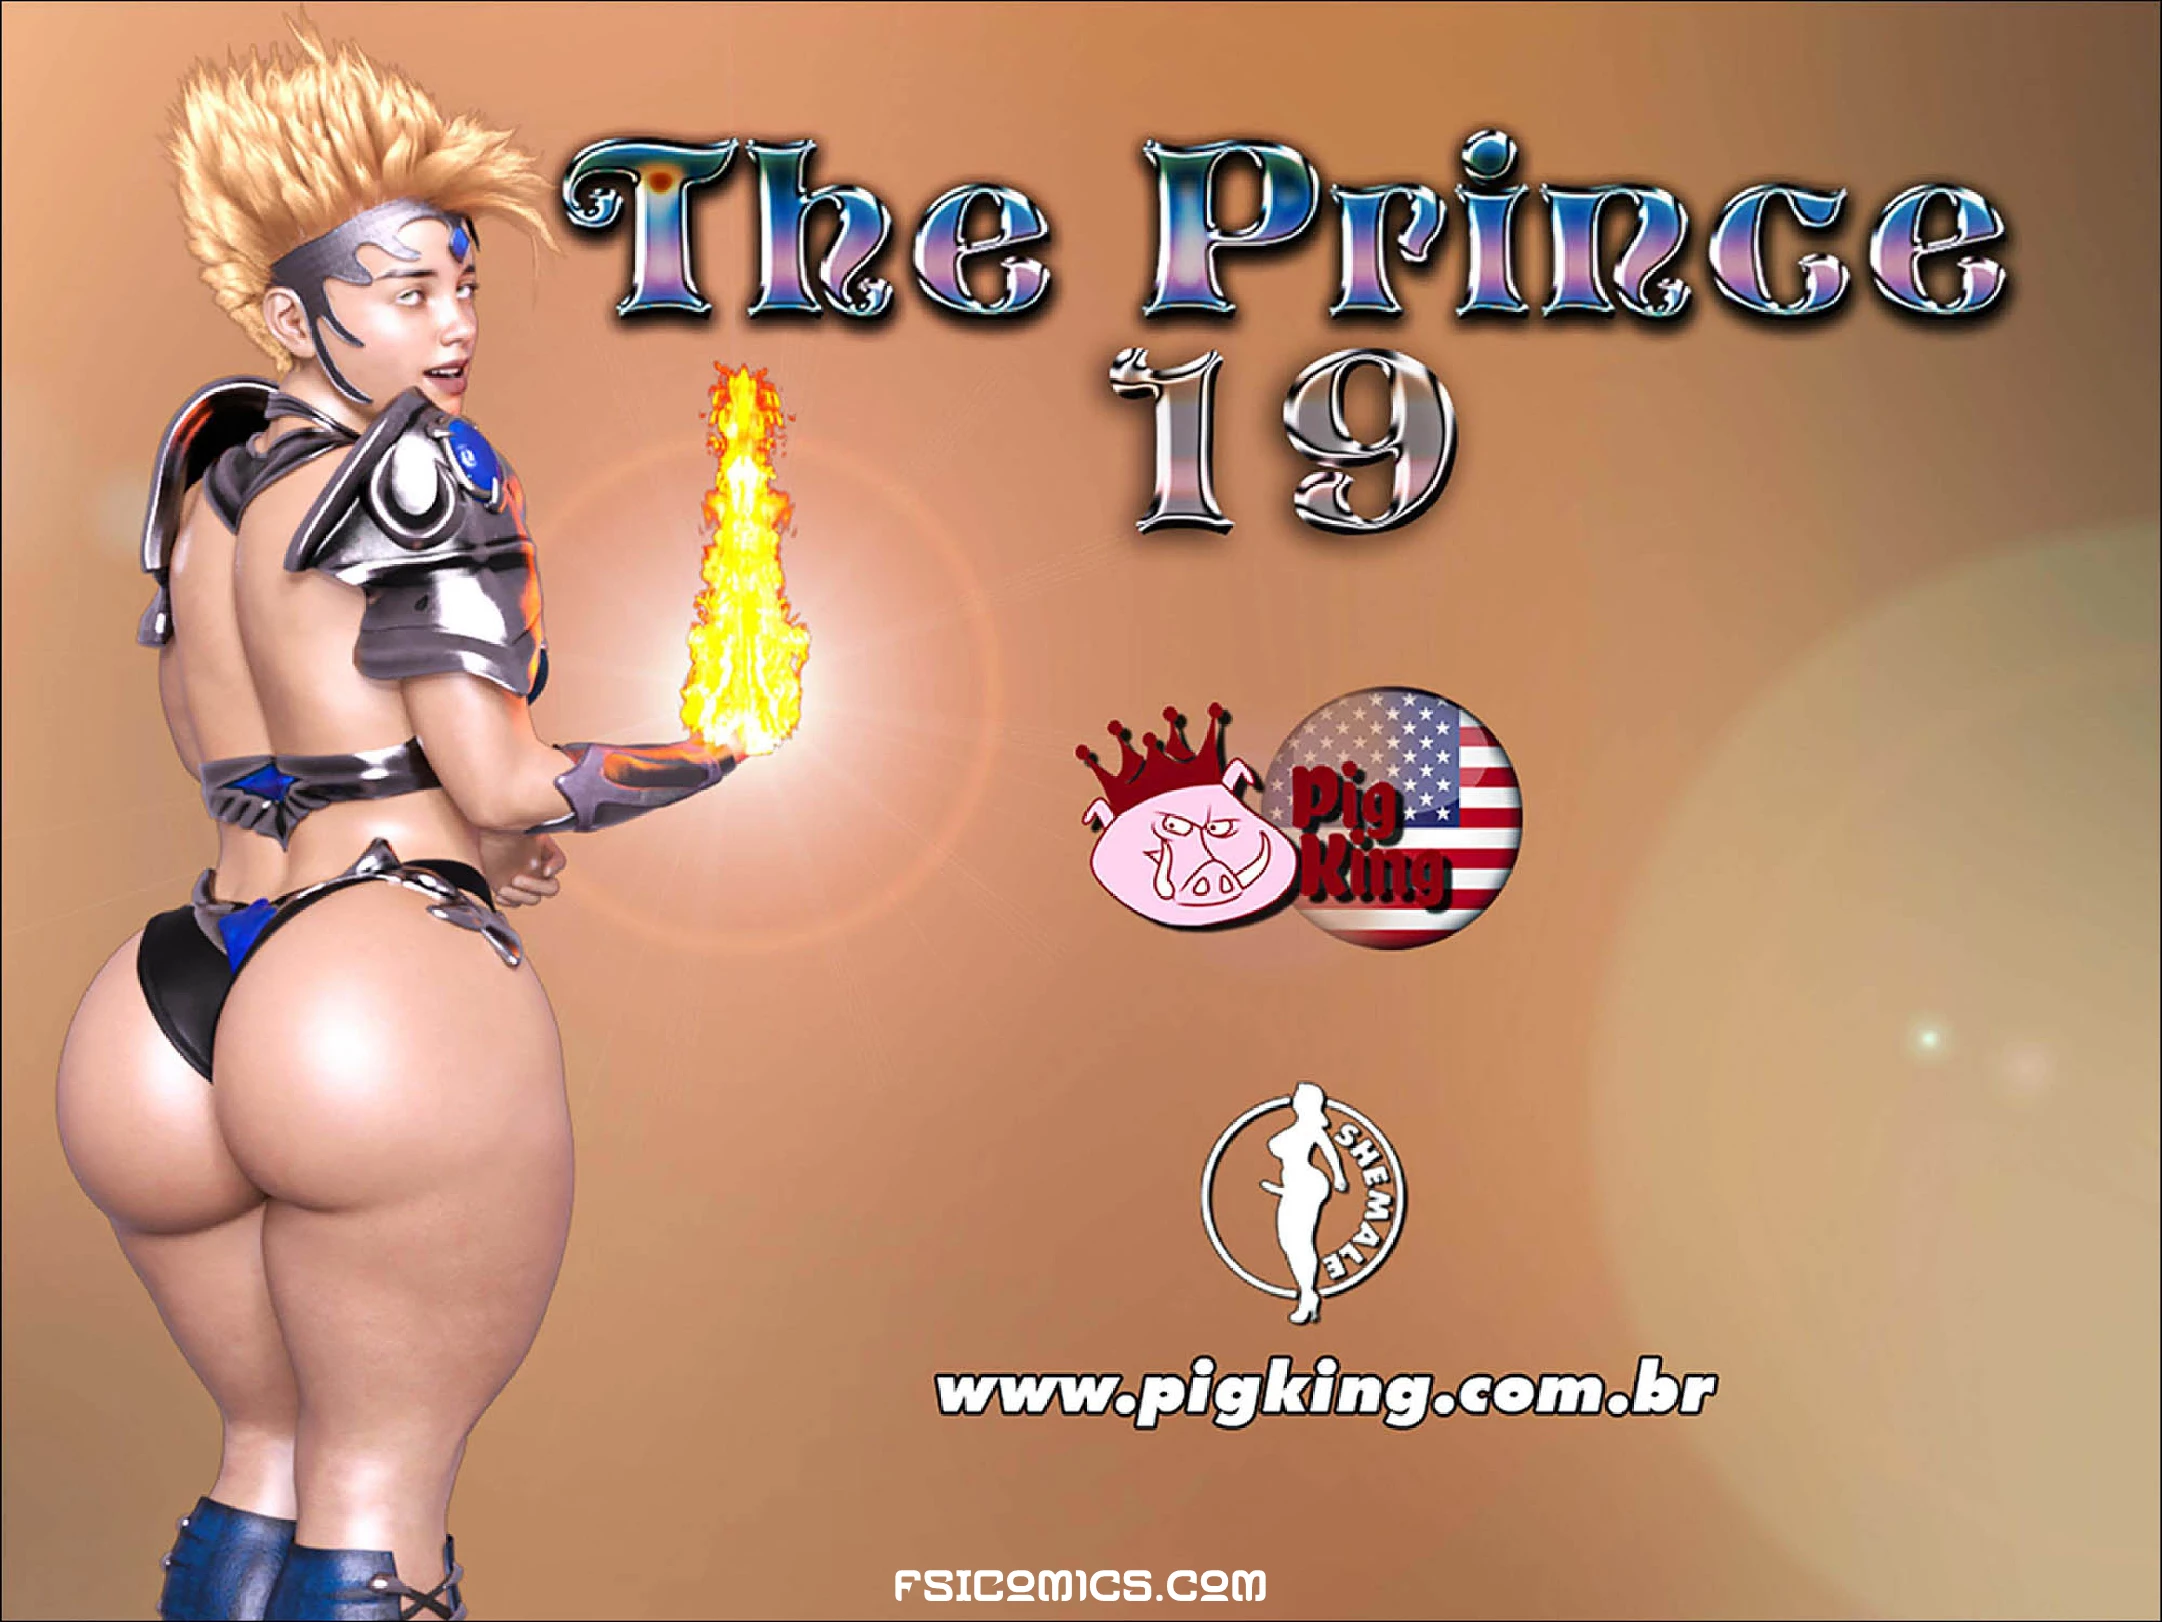 The Prince Chapter 19 – PigKing - 247 - FSIComics